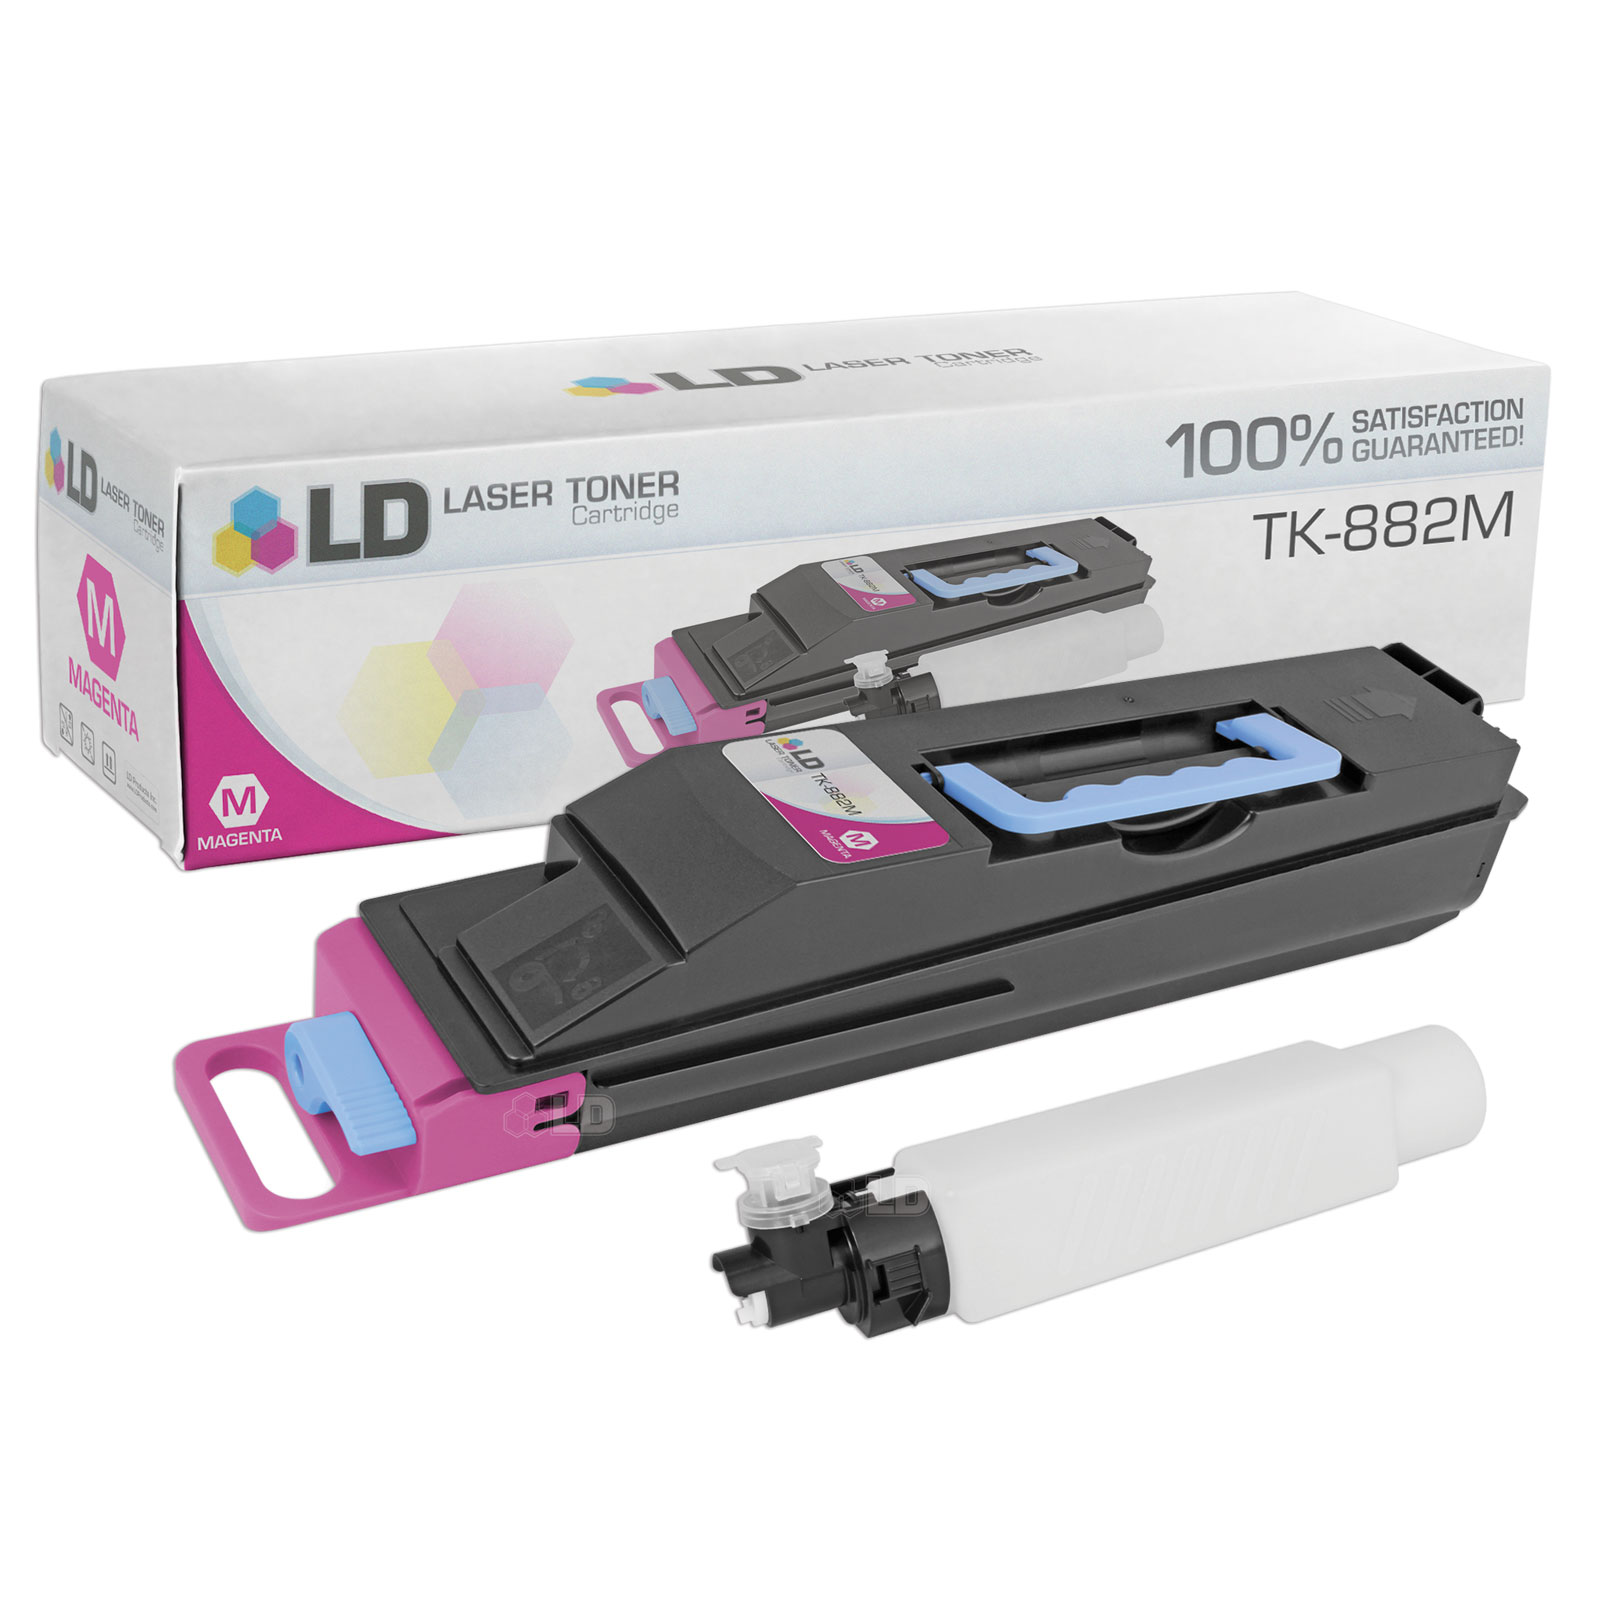 LD Compatible Replacement for Kyocera-Mita 1T02KABUS0 (TK-882M) Magenta Laser Toner Cartridge for use in Kyocera-Mita FS-C8500DN - image 1 of 1